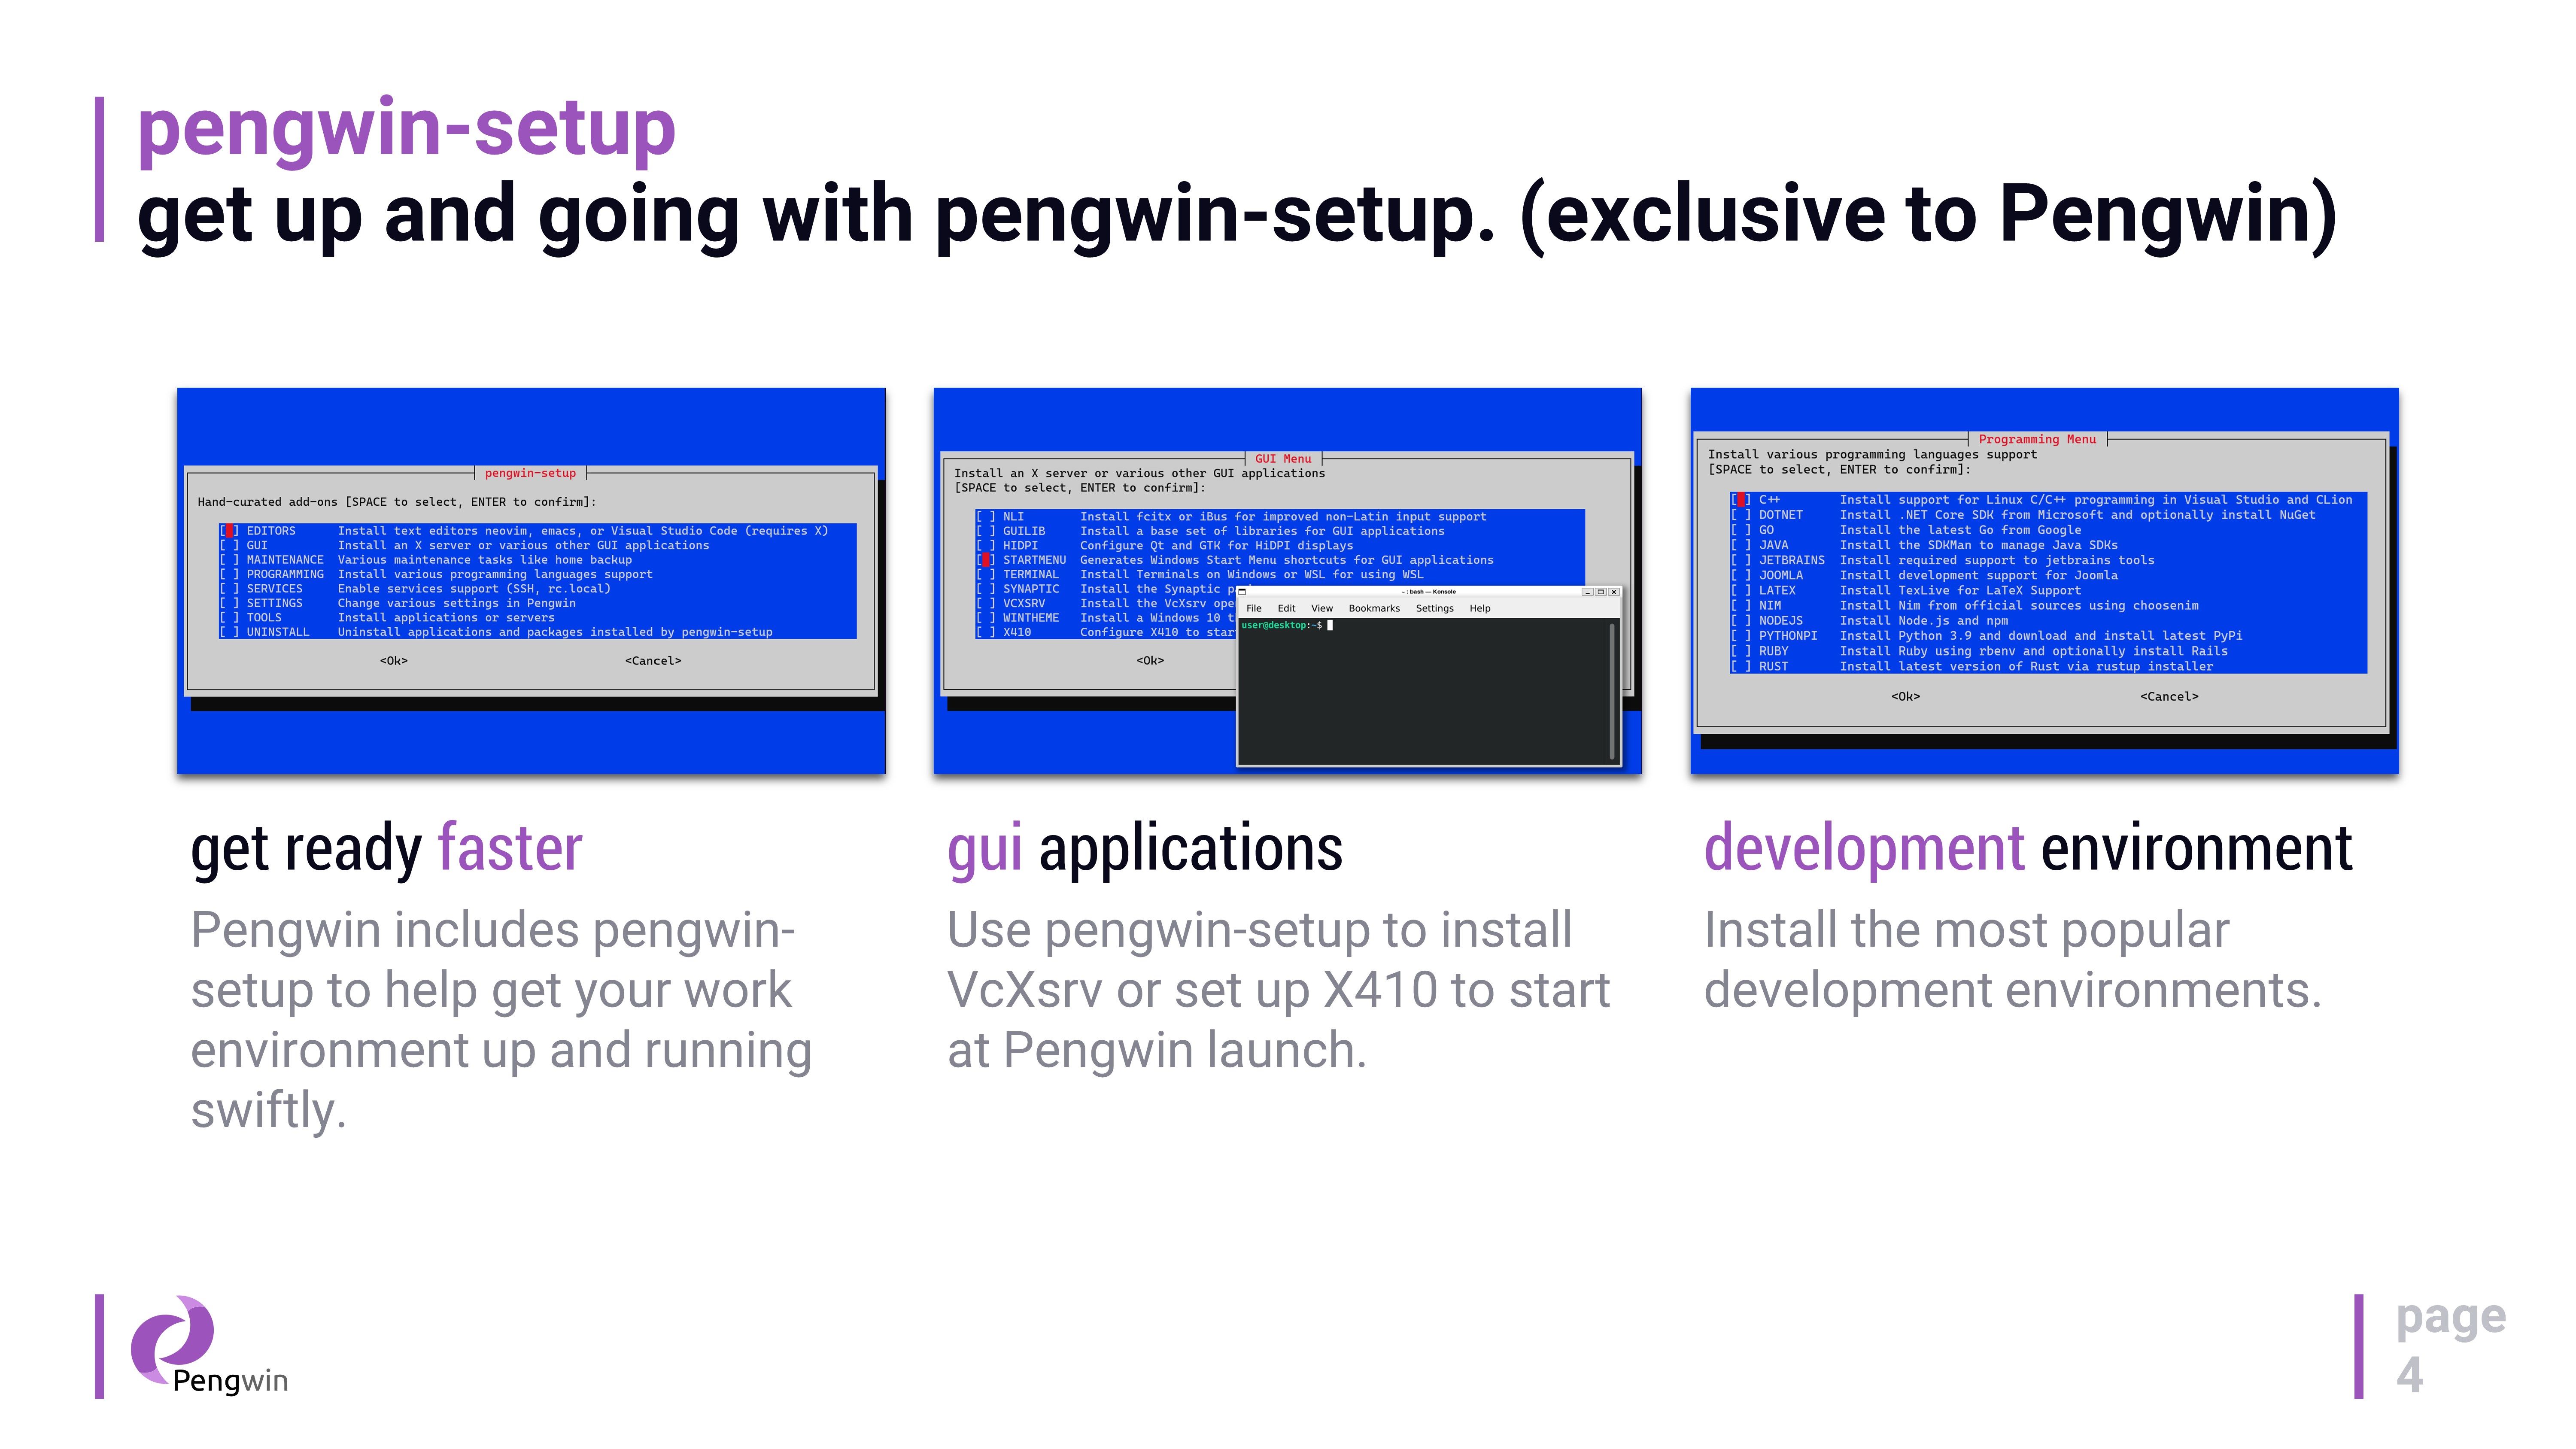 get up and going with pengwin-setup. (exclusive to Pengwin)